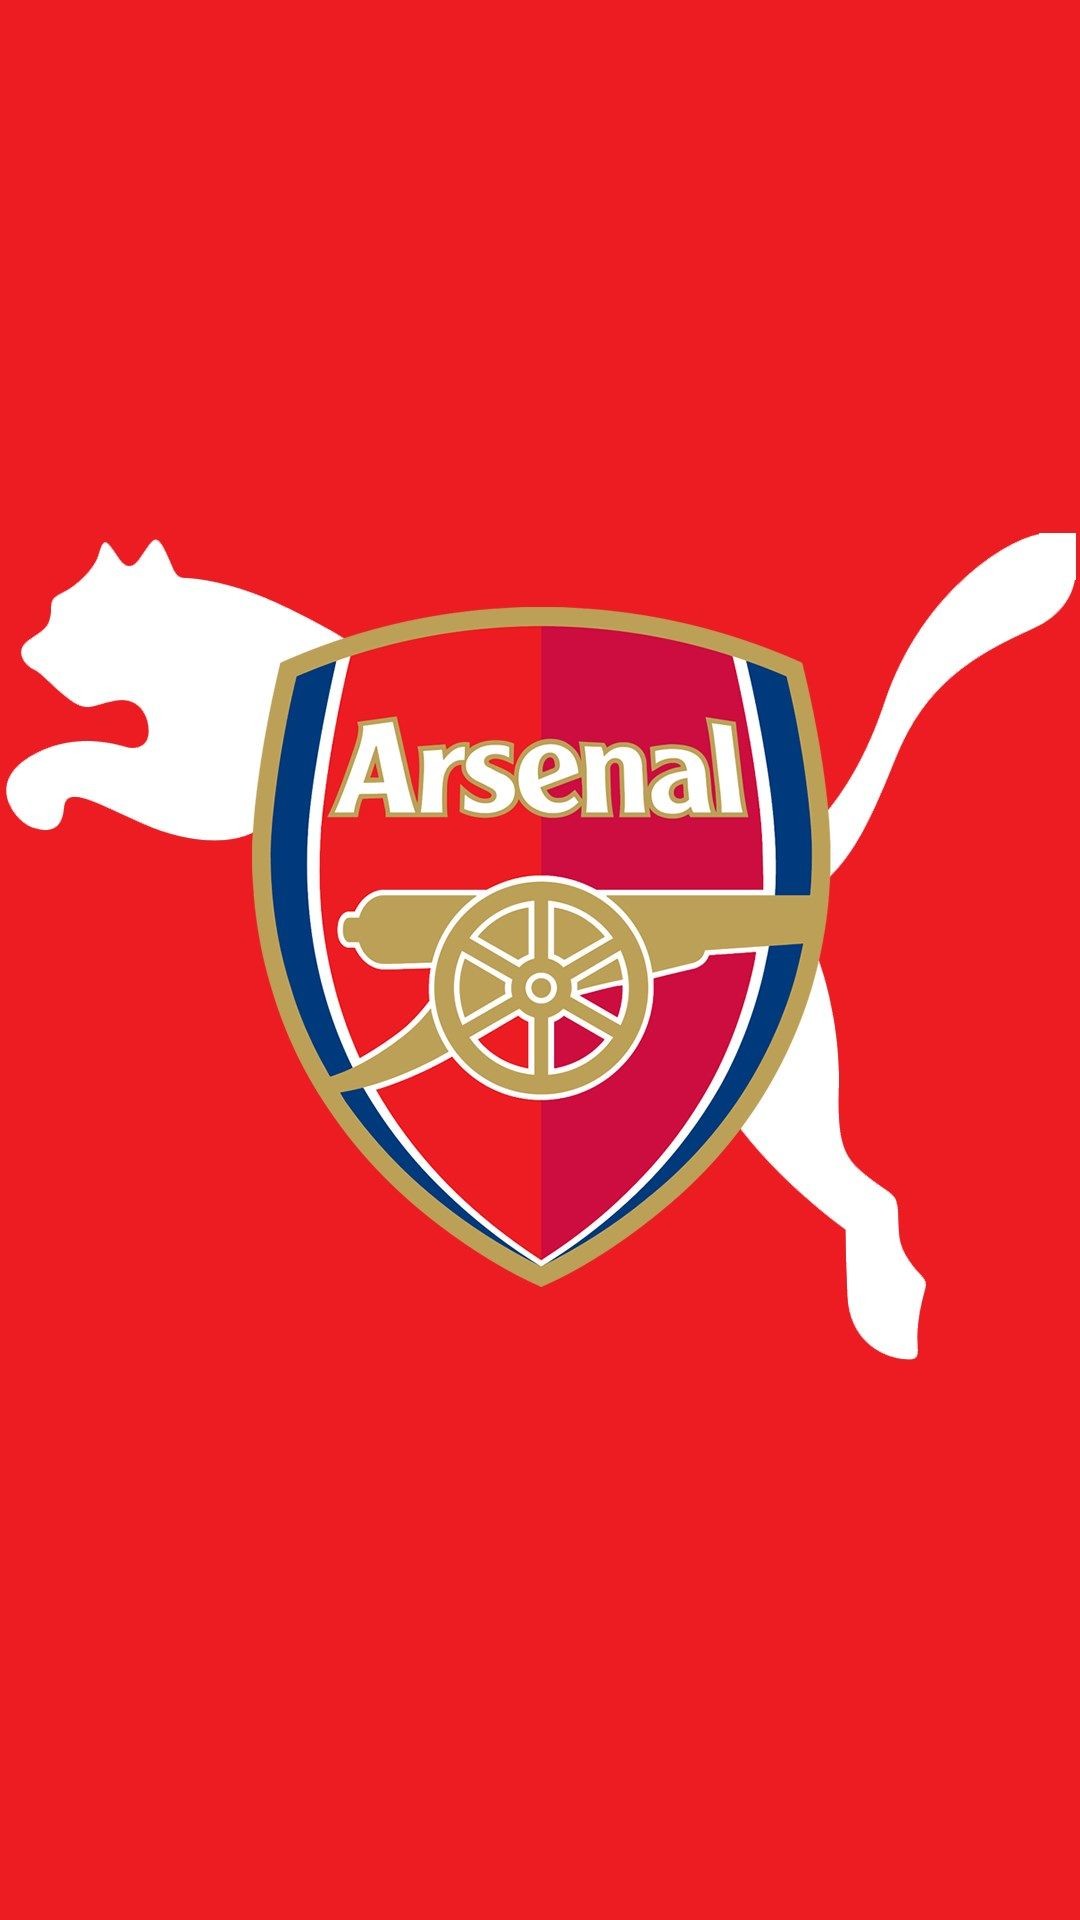 1080x1920 red background arsenal logo wallpaper for mobile